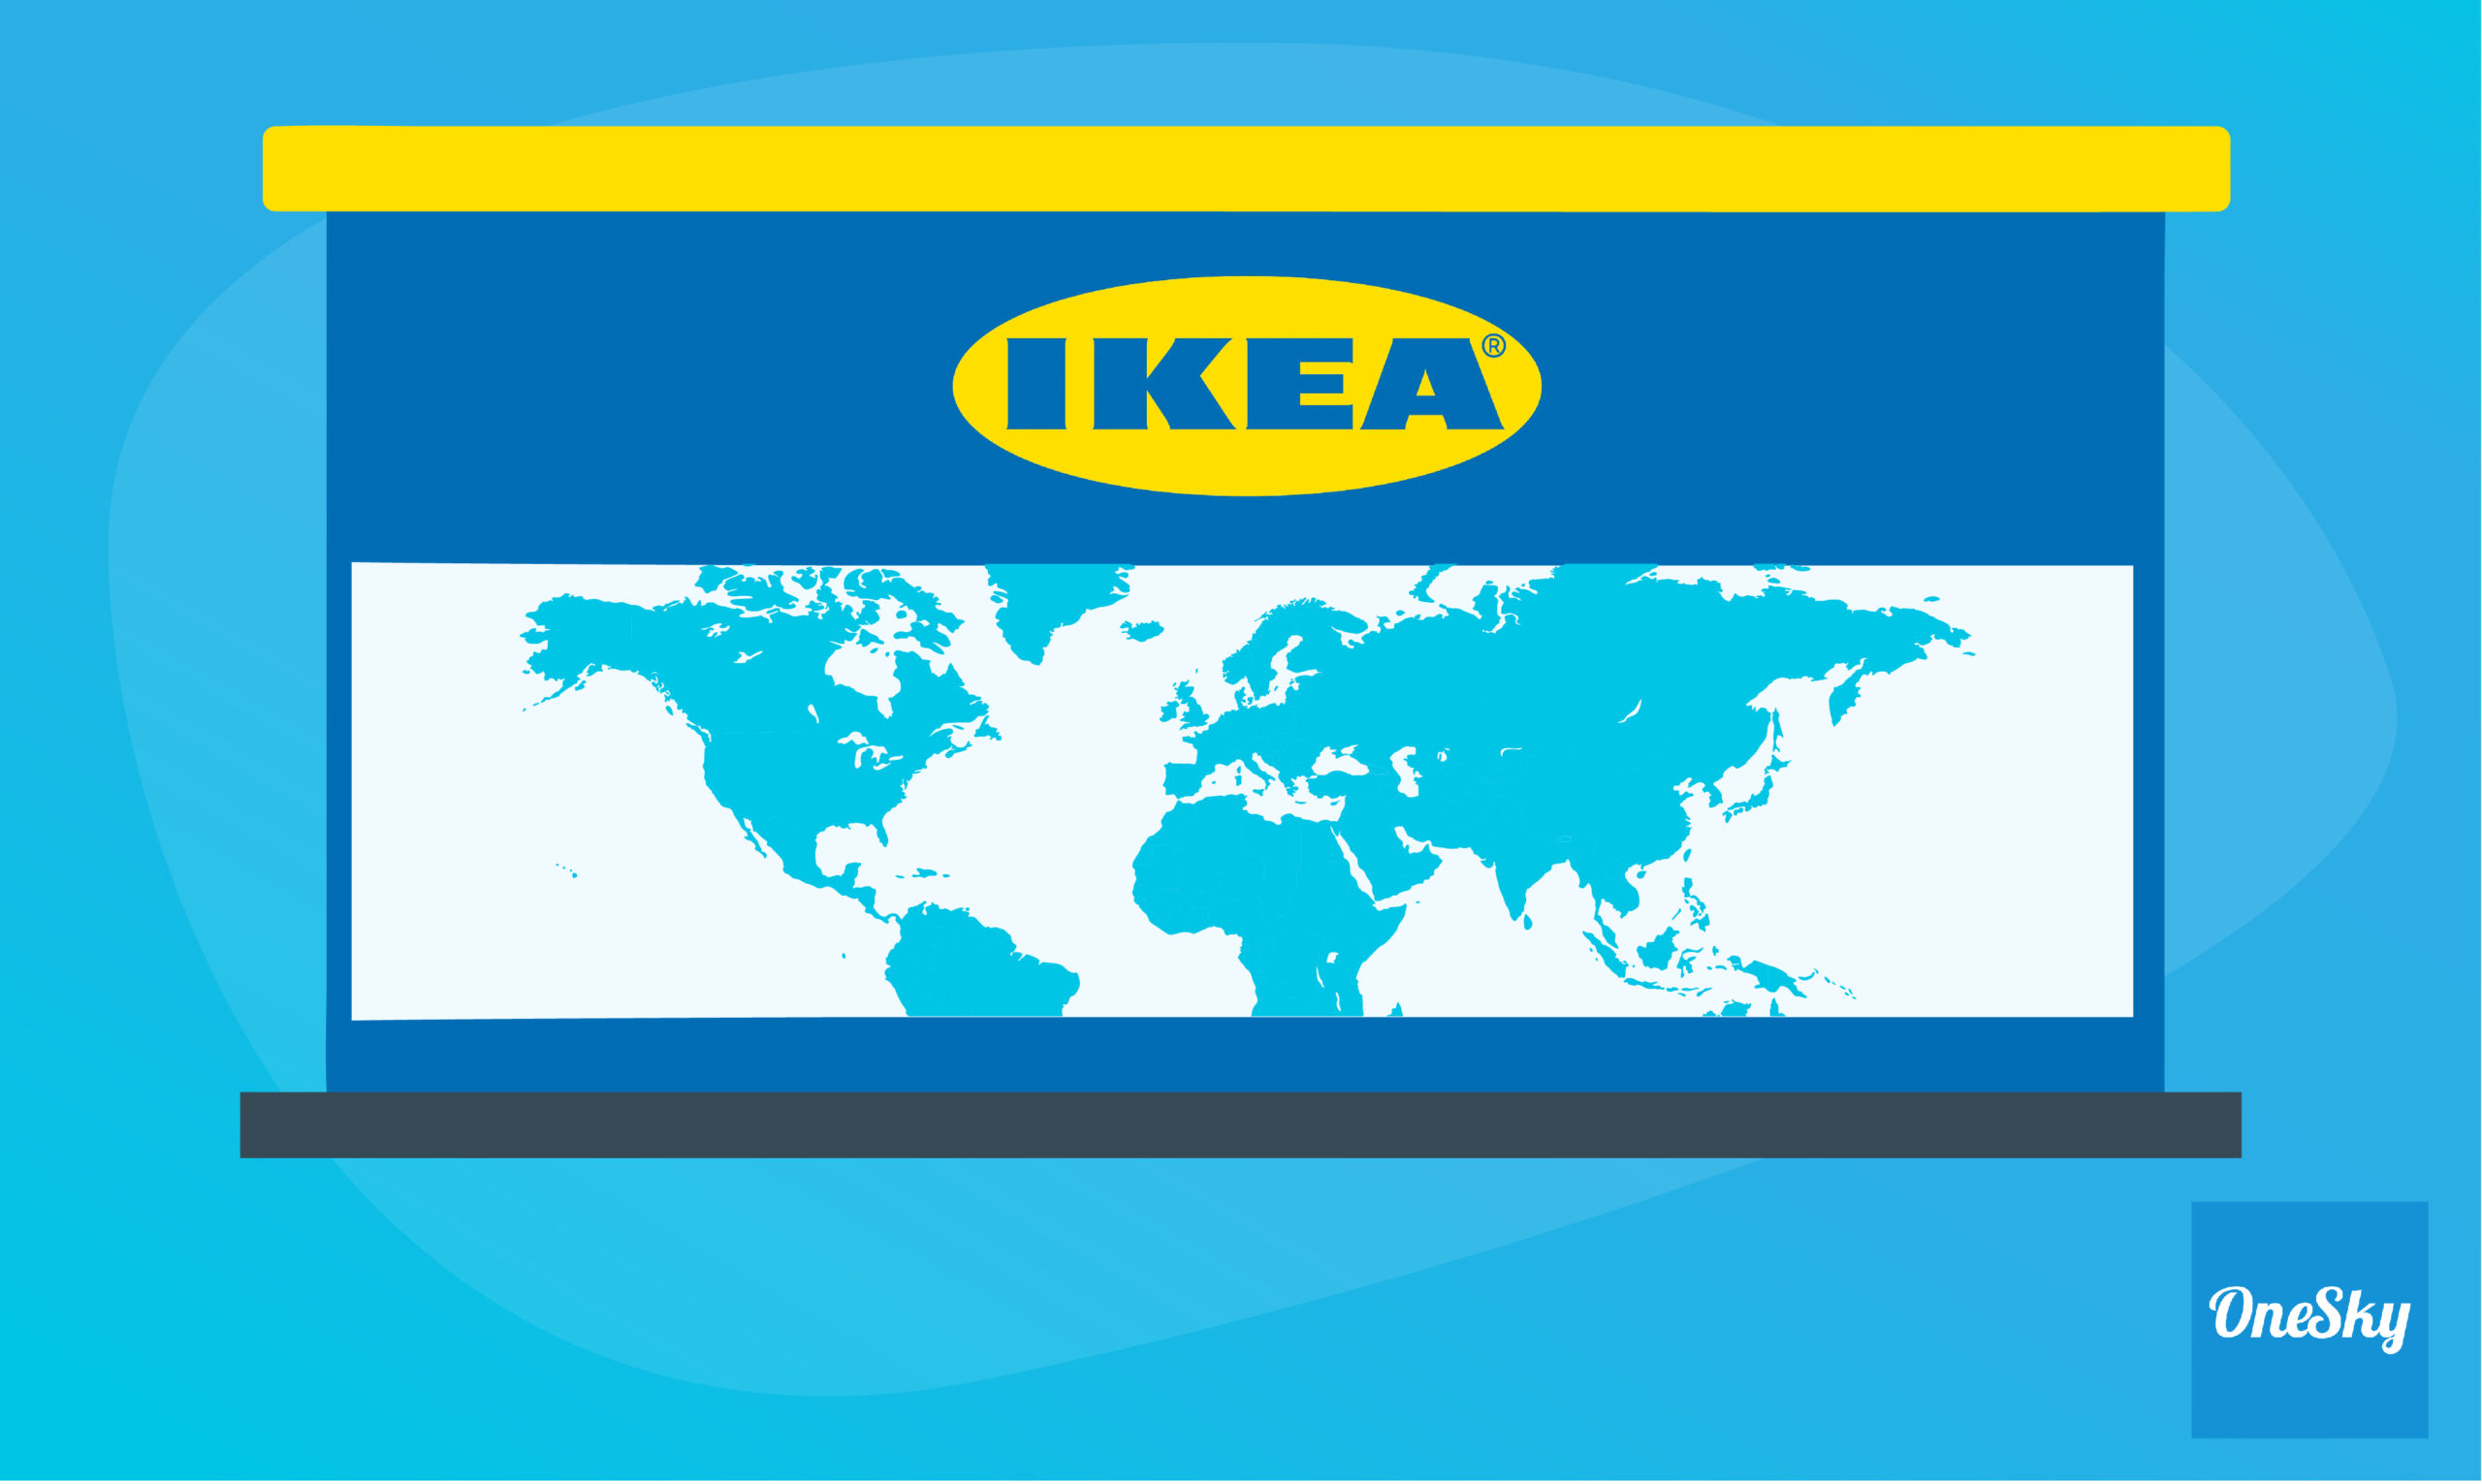 How a Smart Localization Strategy Helped IKEA to Conquer the World